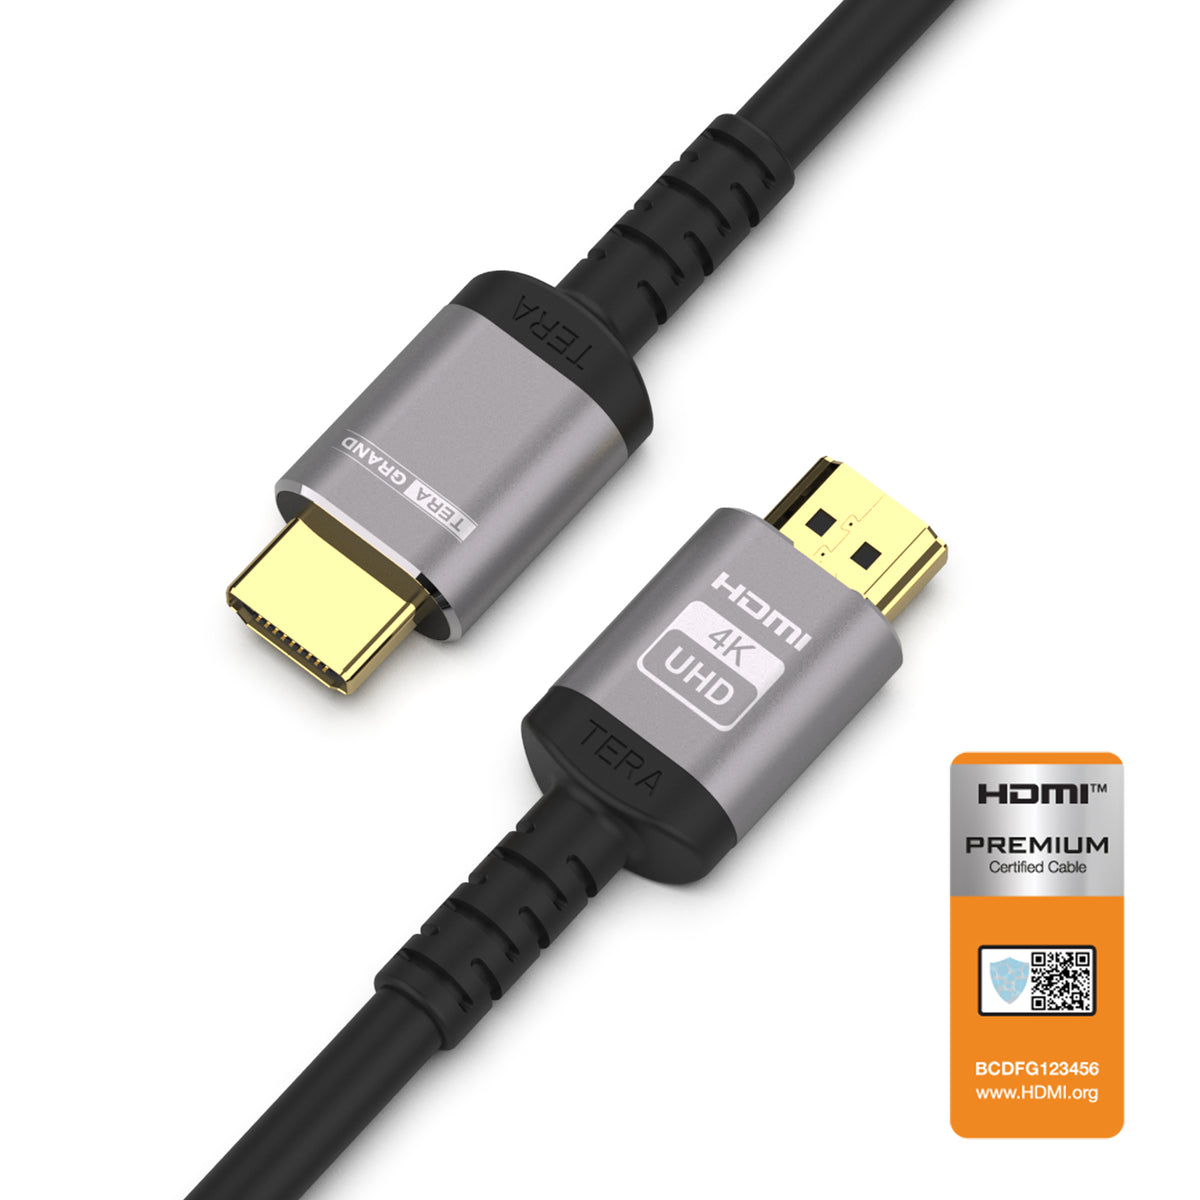 Premium HDMI Certified 2.0 Cable with Aluminum housing, Supports 4K HDR UltraHD, 18 4K/60Hz, 10 Feet ( 3 meter) — Tera Grand